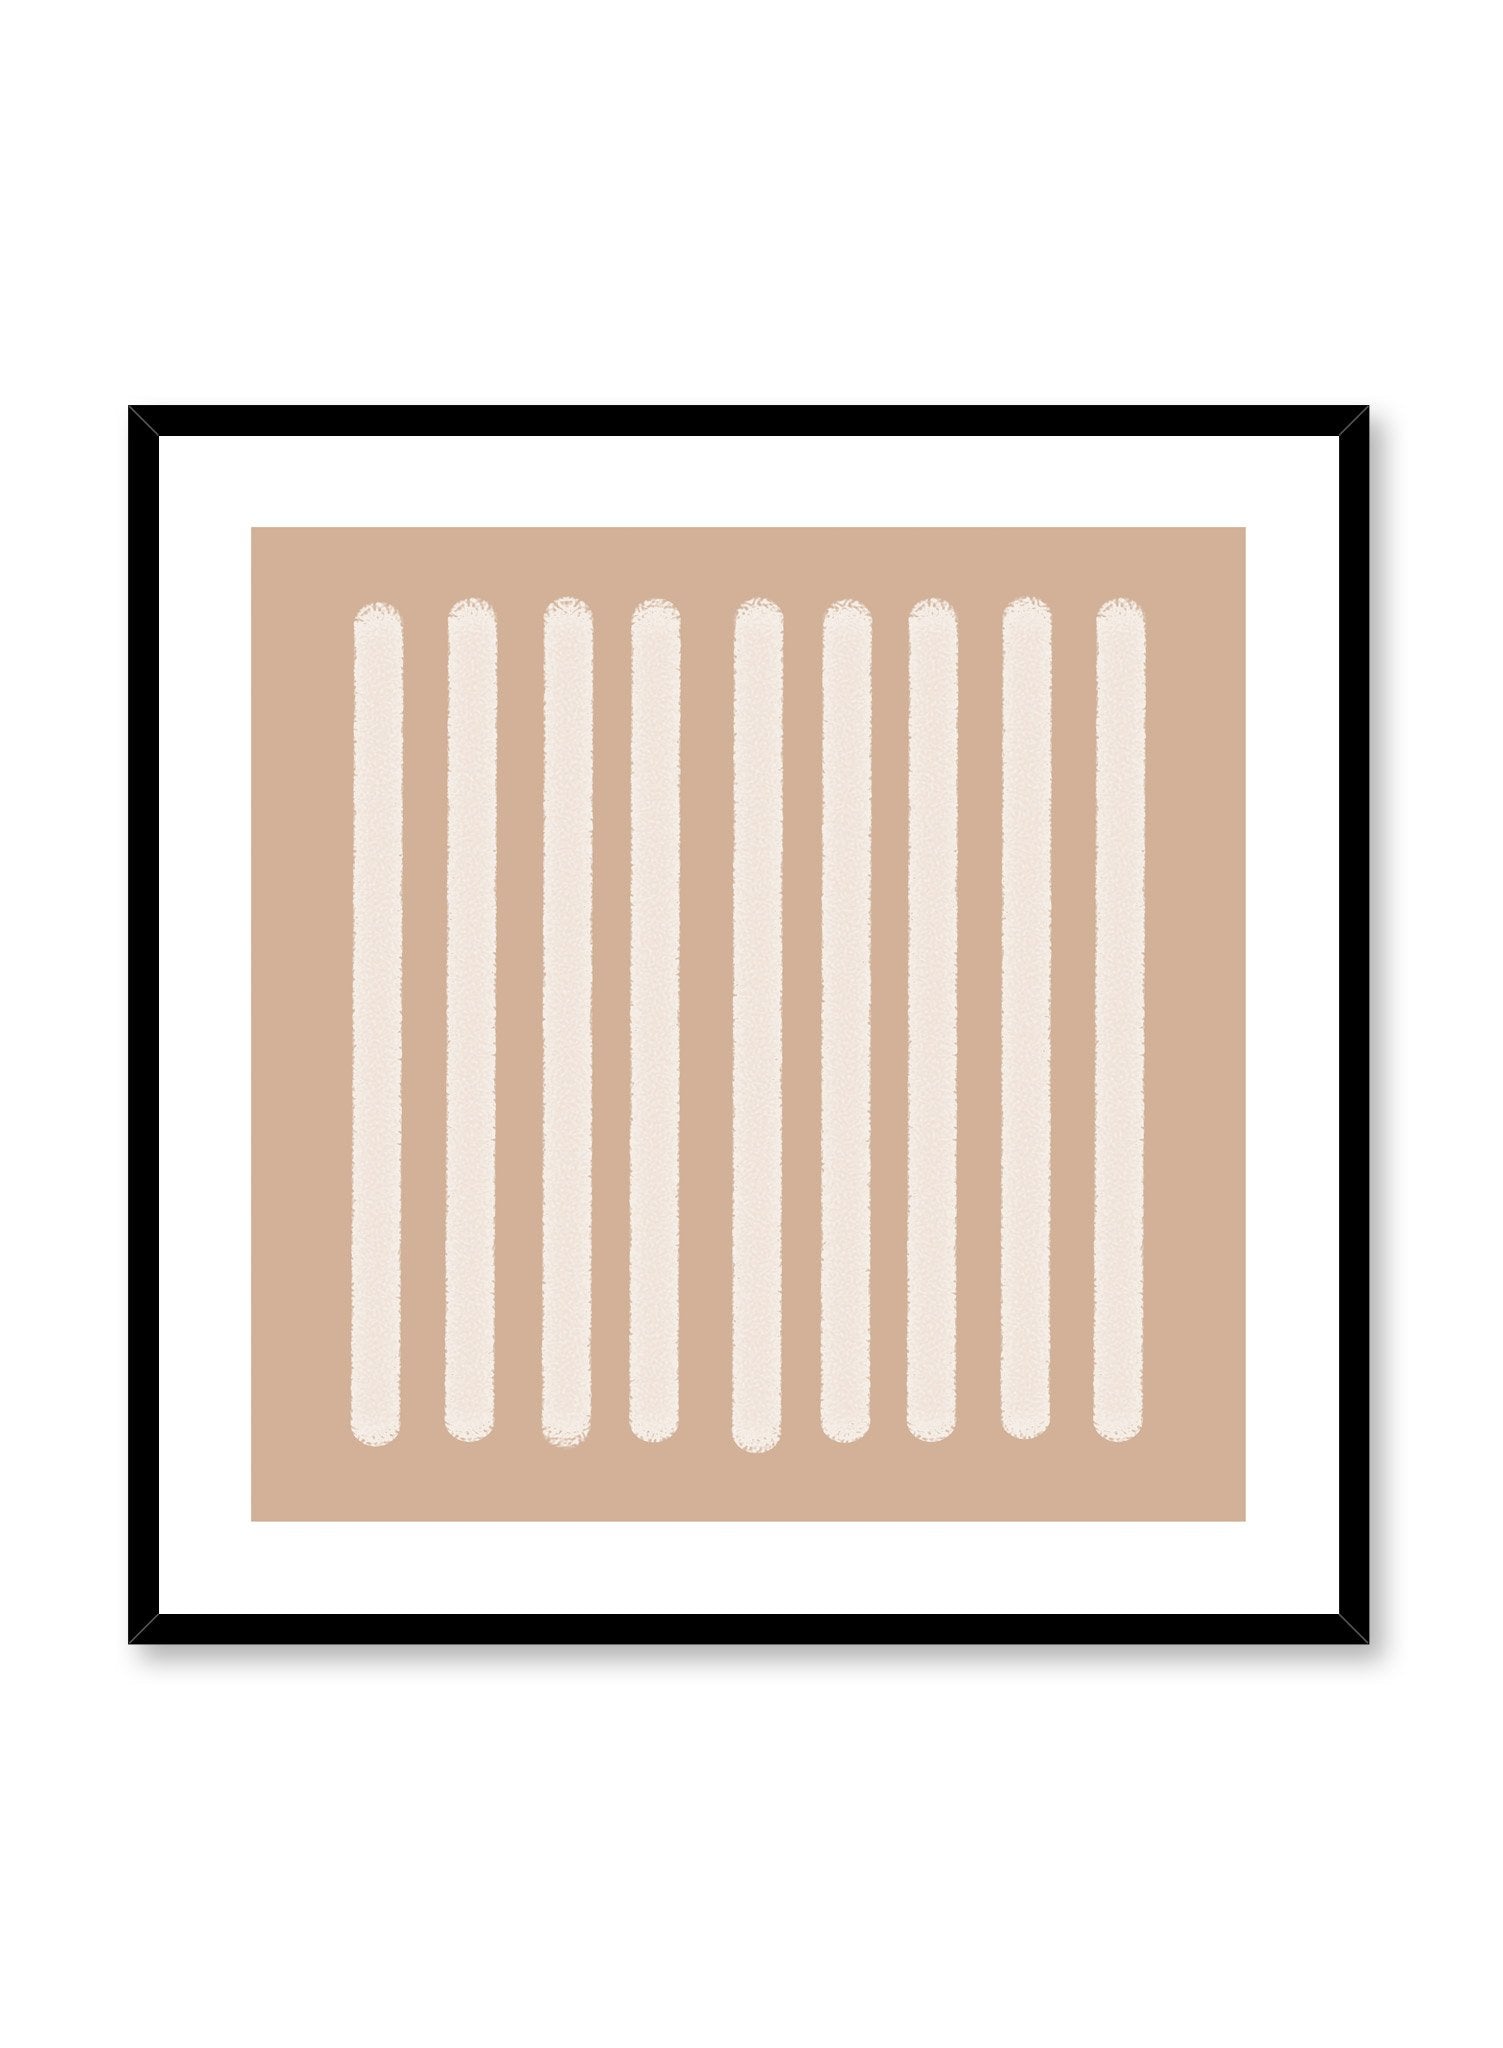 Minimalist design poster by Opposite Wall with abstract beige rectangle shapes in square format